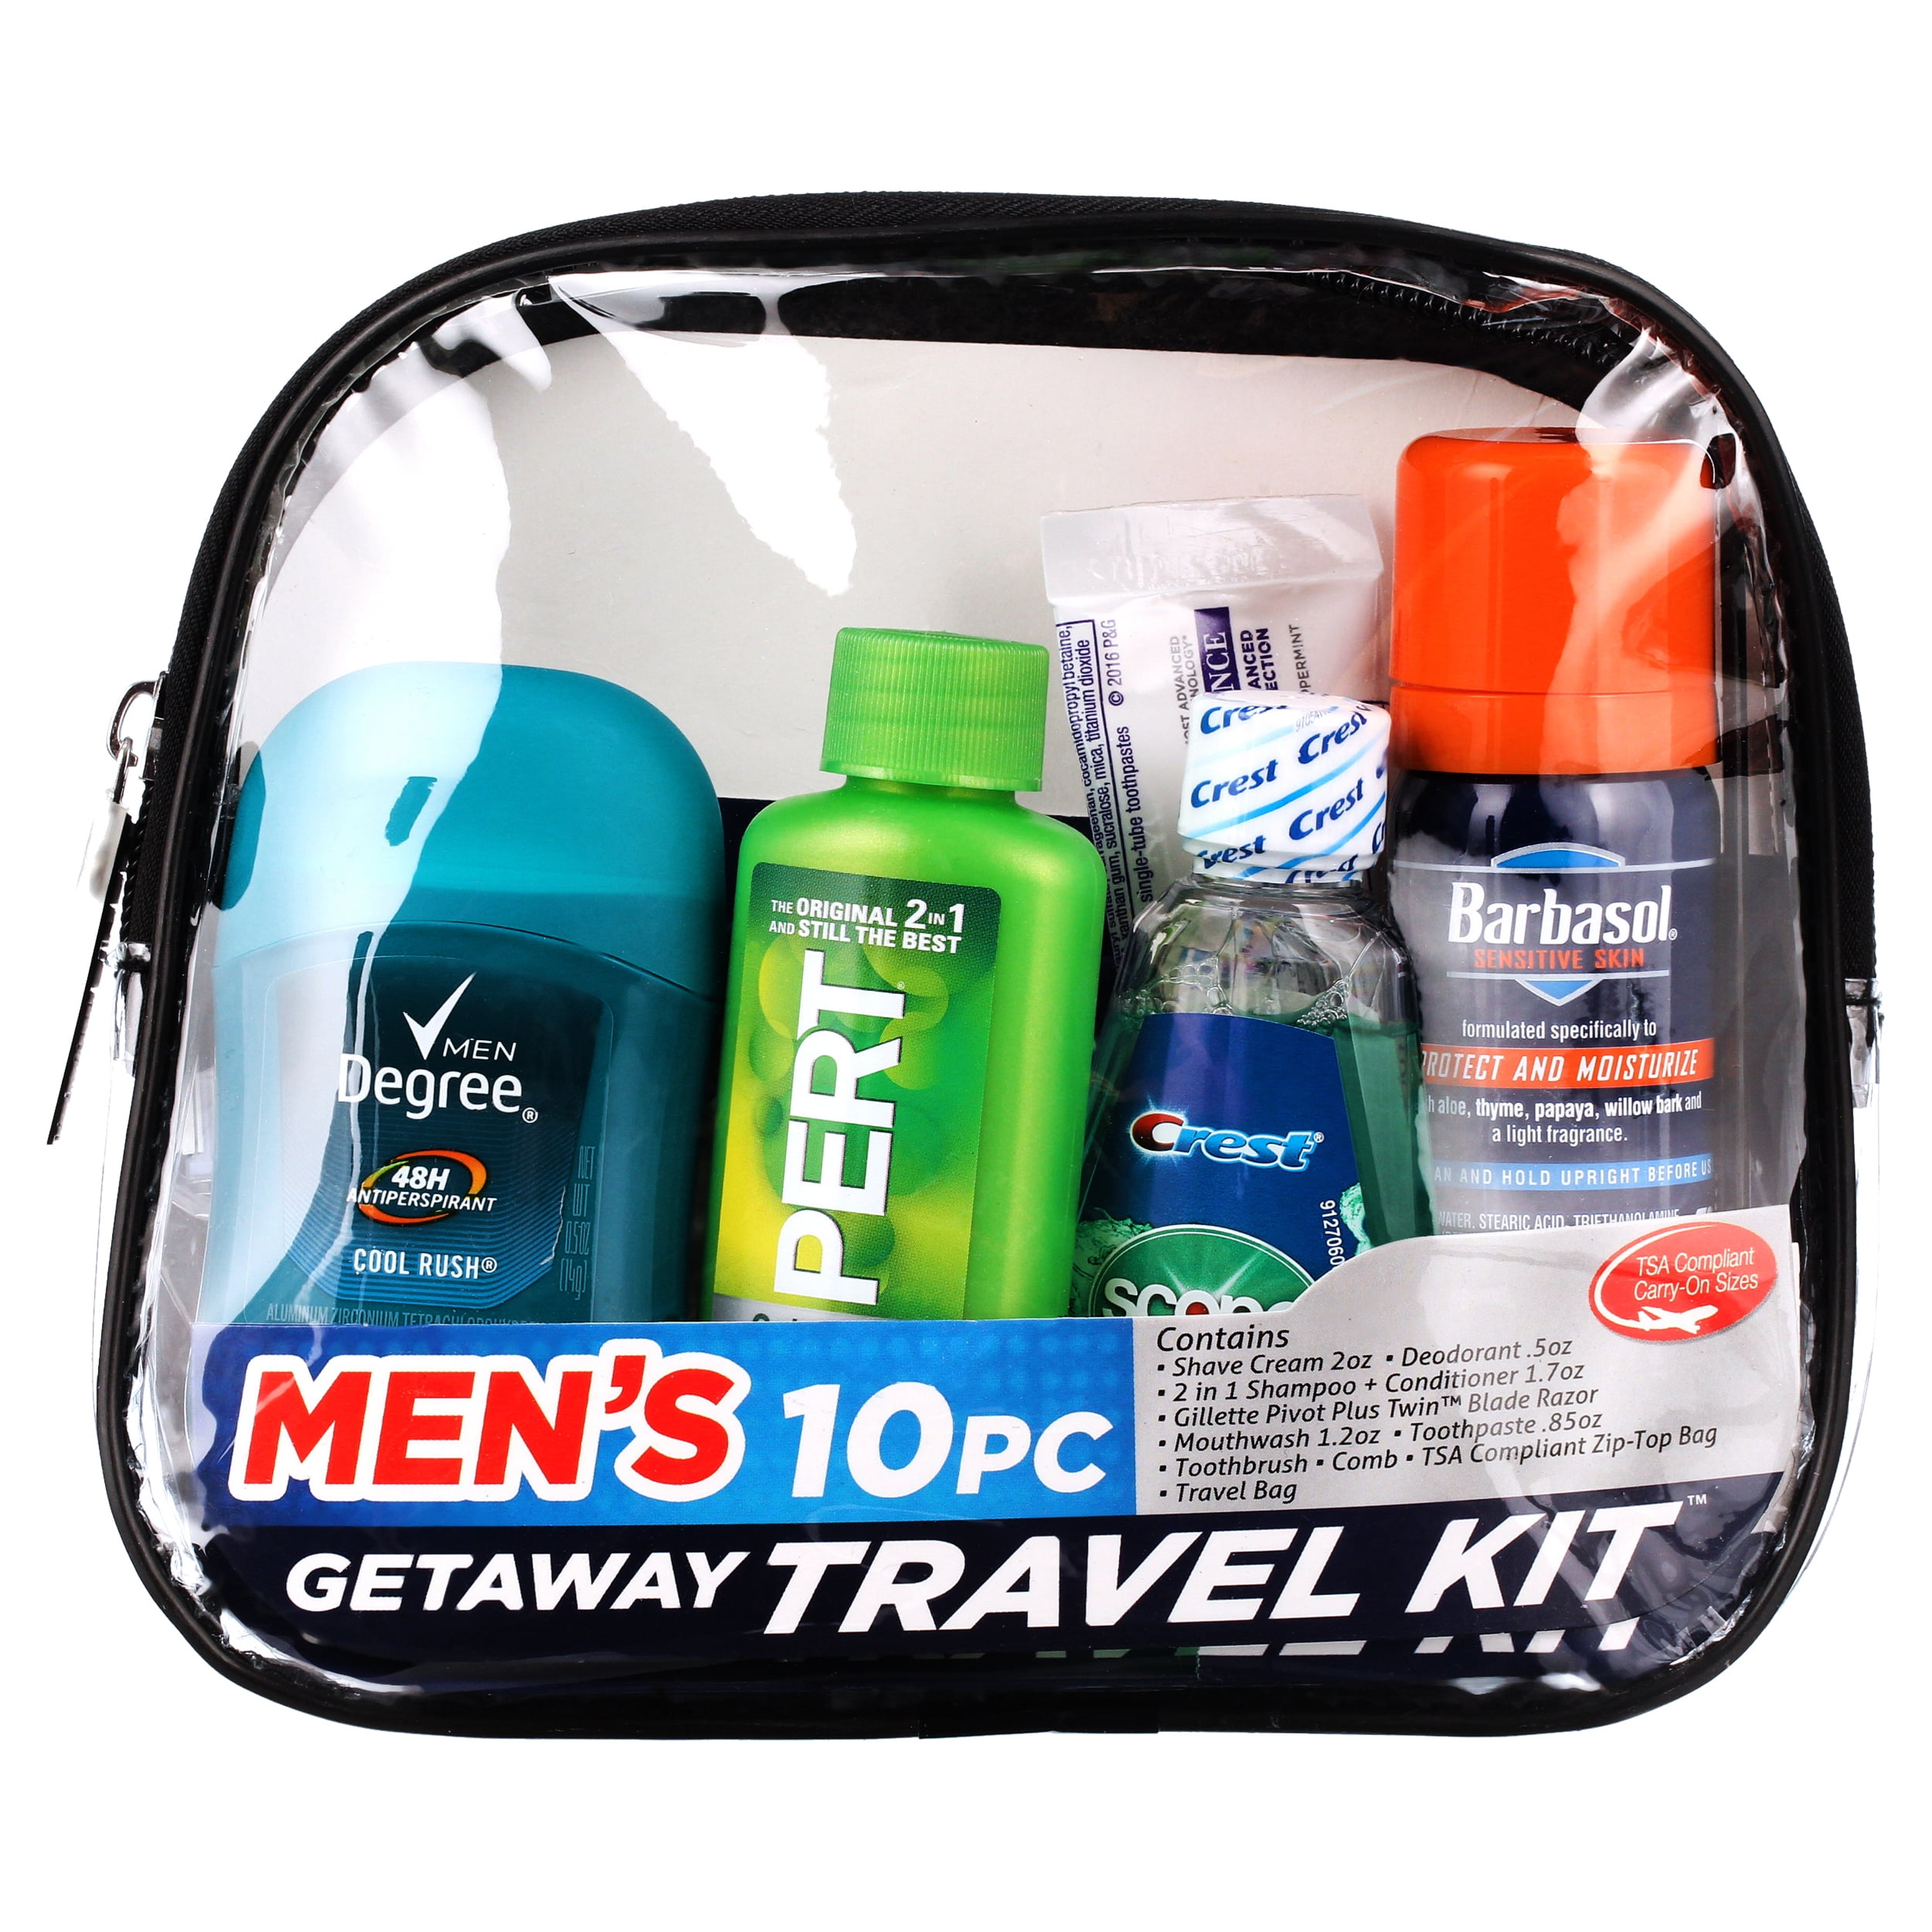 Free Shipping on orders over $35. Buy Man on the Go Men's Get Away